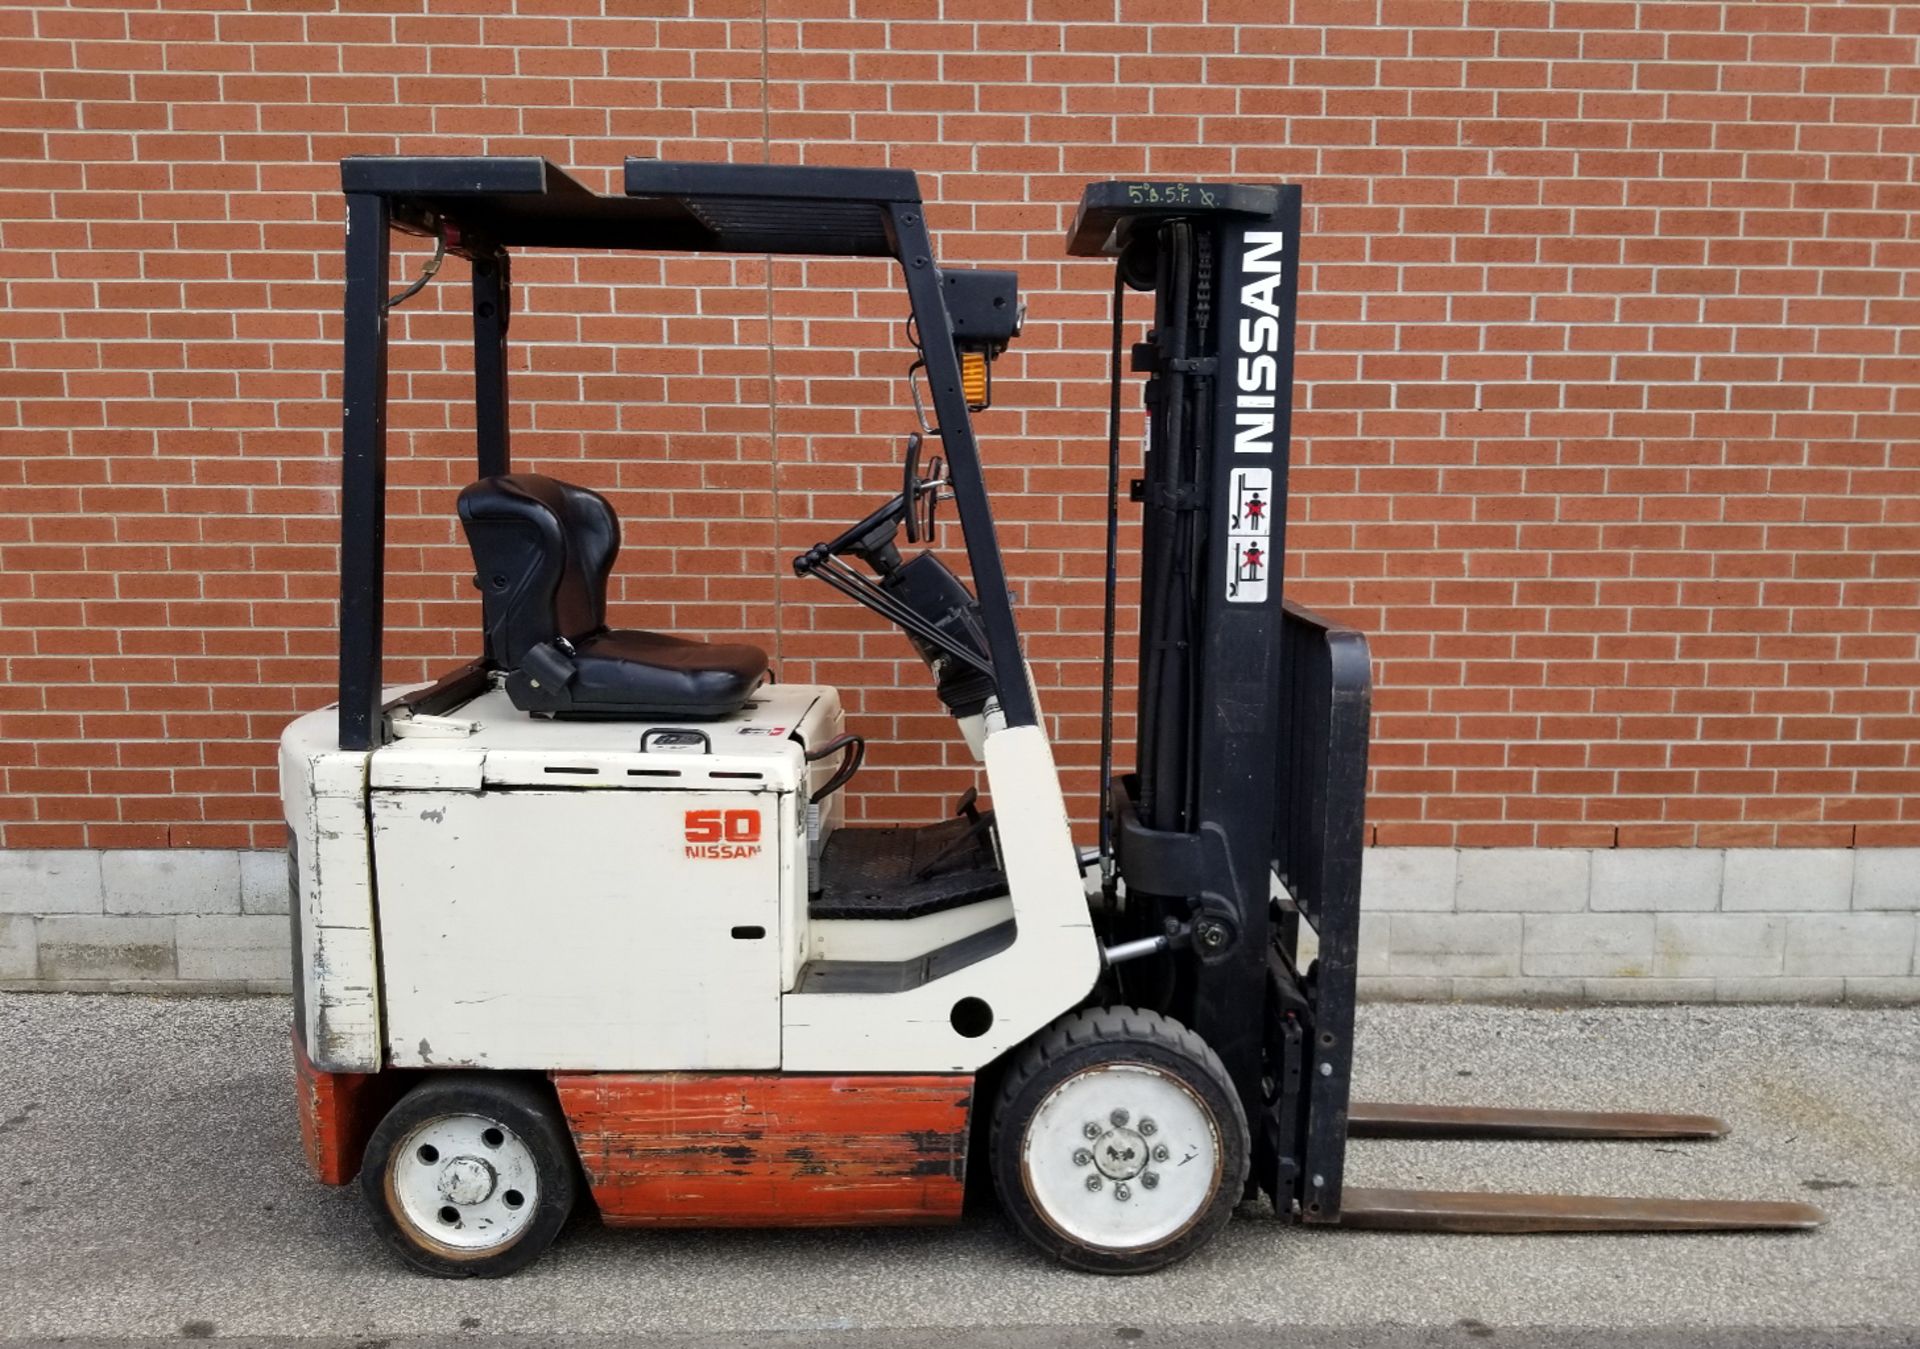 NISSAN CYM02L25S 48V ELECTRIC FORKLIFT WITH 4400 LB. CAPACITY, 187" MAX. VERTICAL LIFT, CUSHION